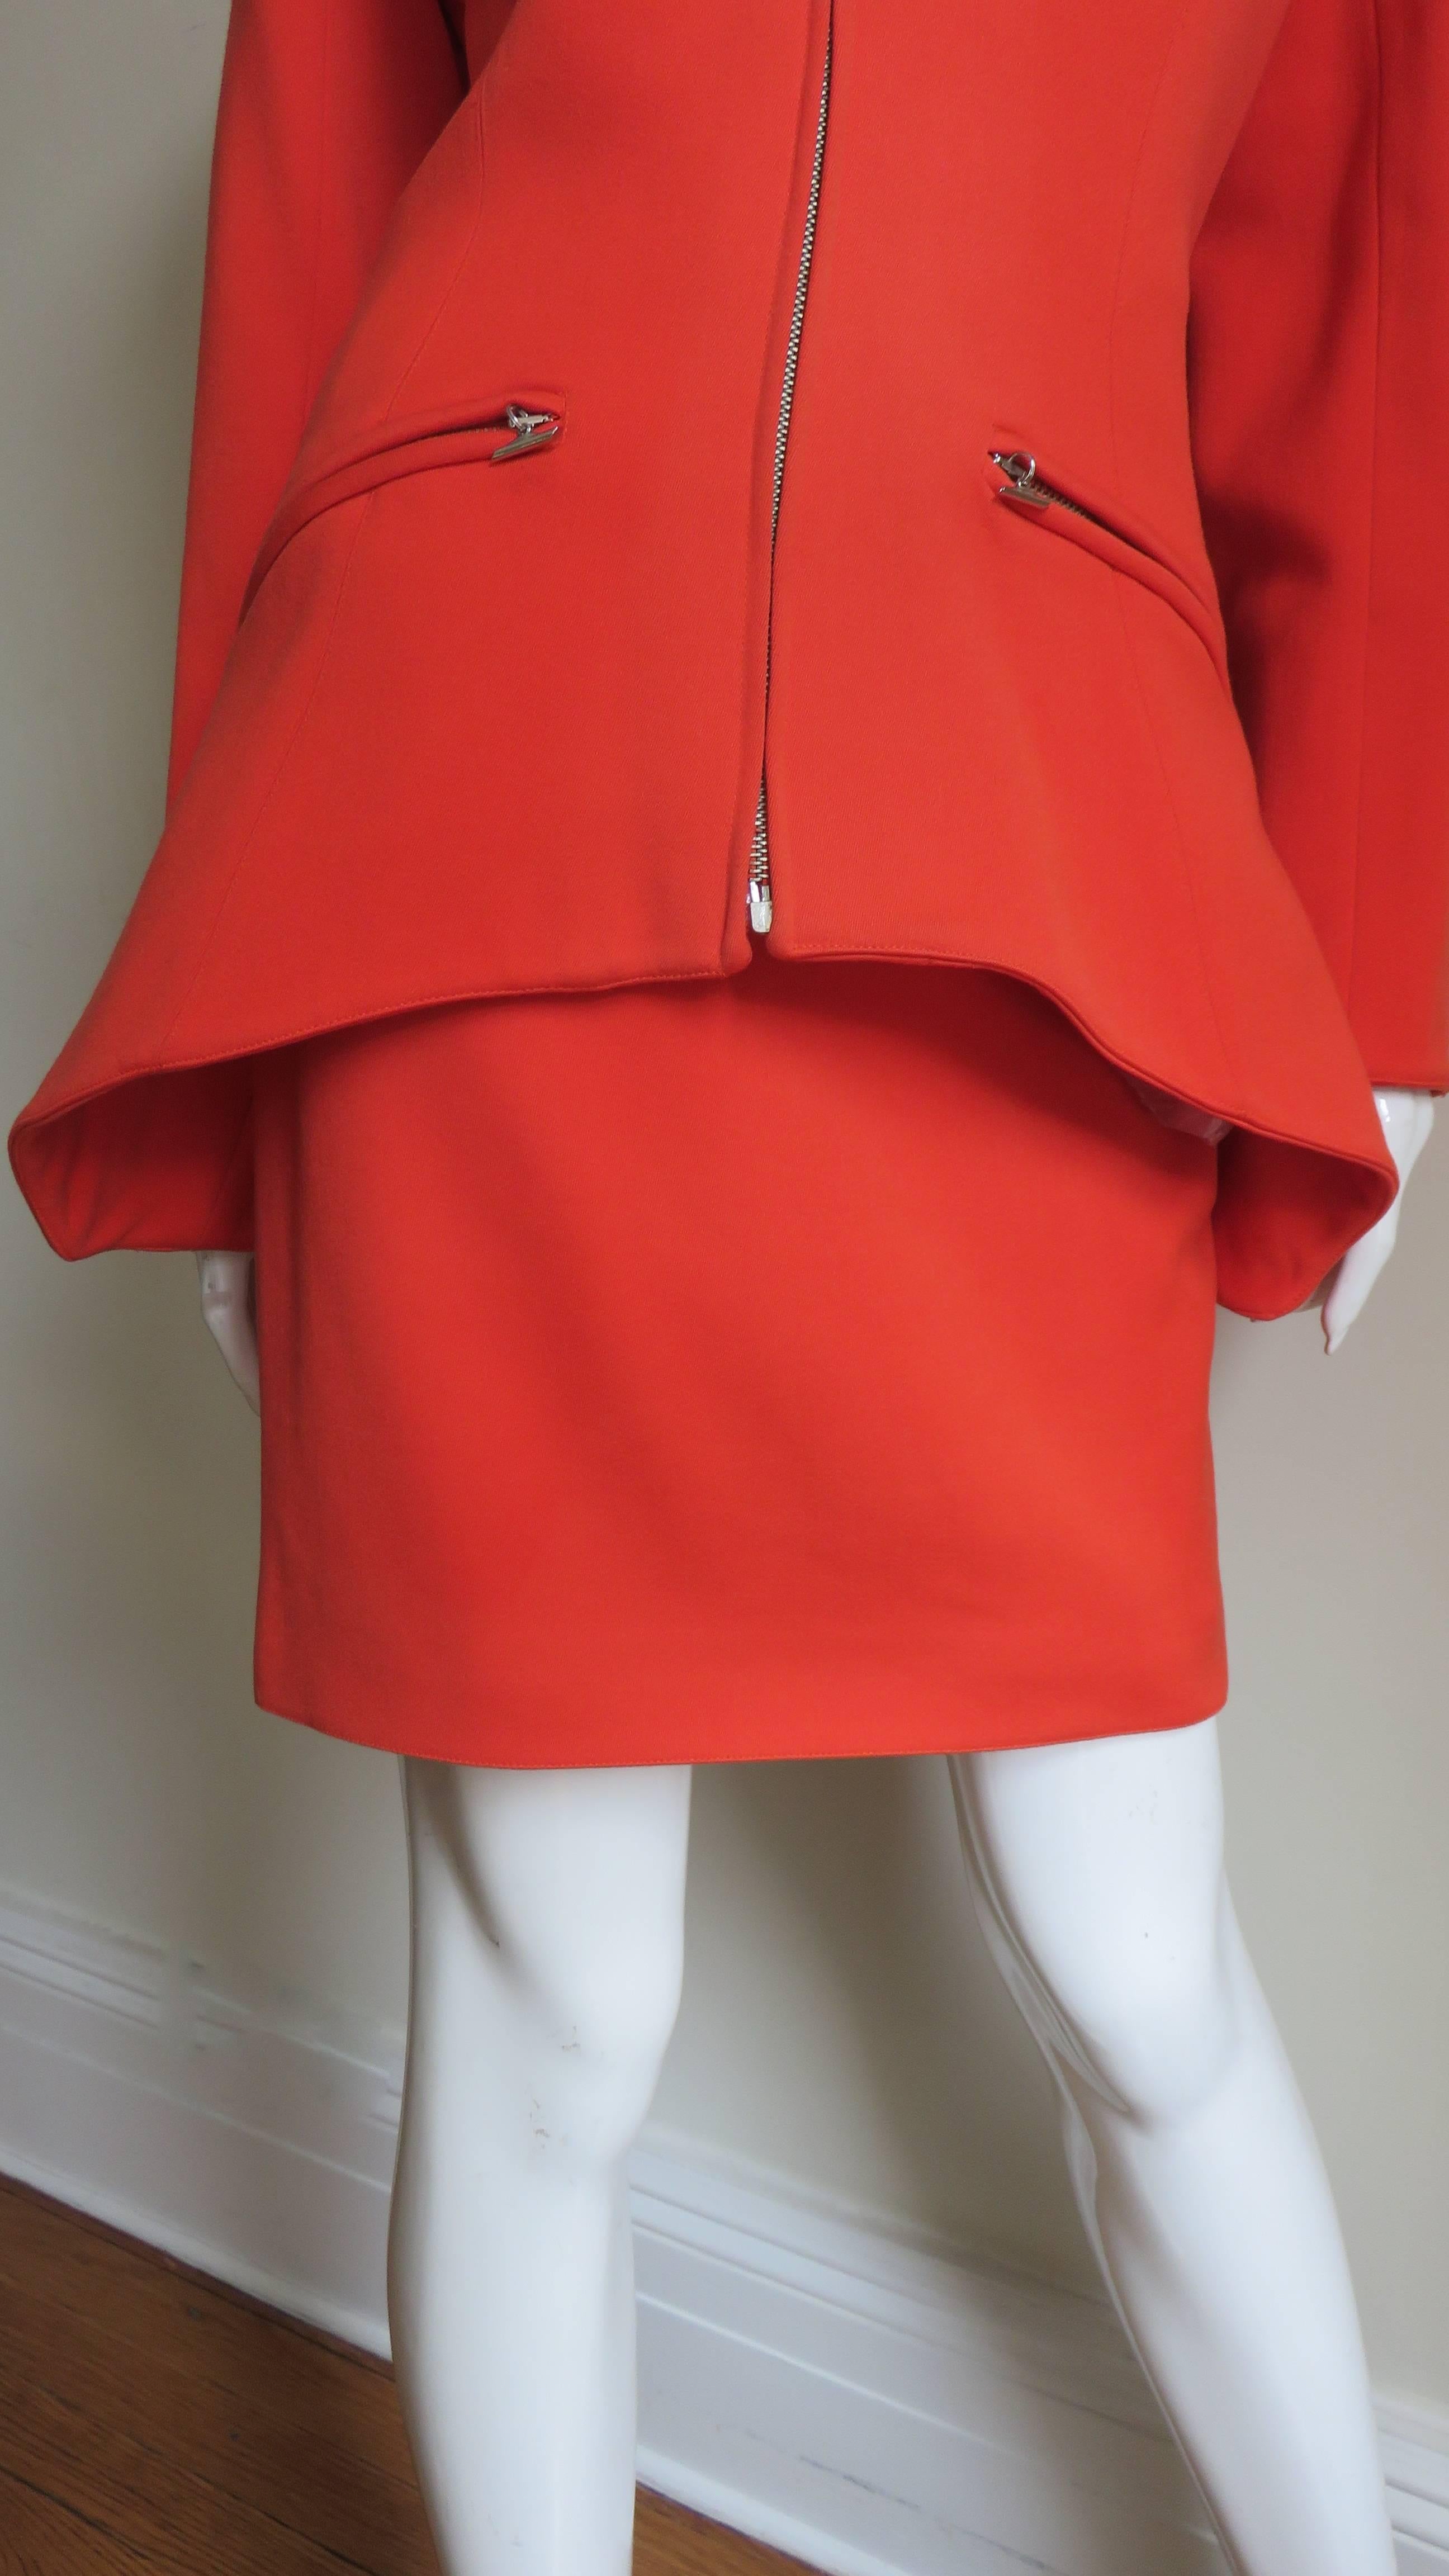 Claude Montana New Skirt Suit A/W 1991 In New Condition For Sale In Water Mill, NY